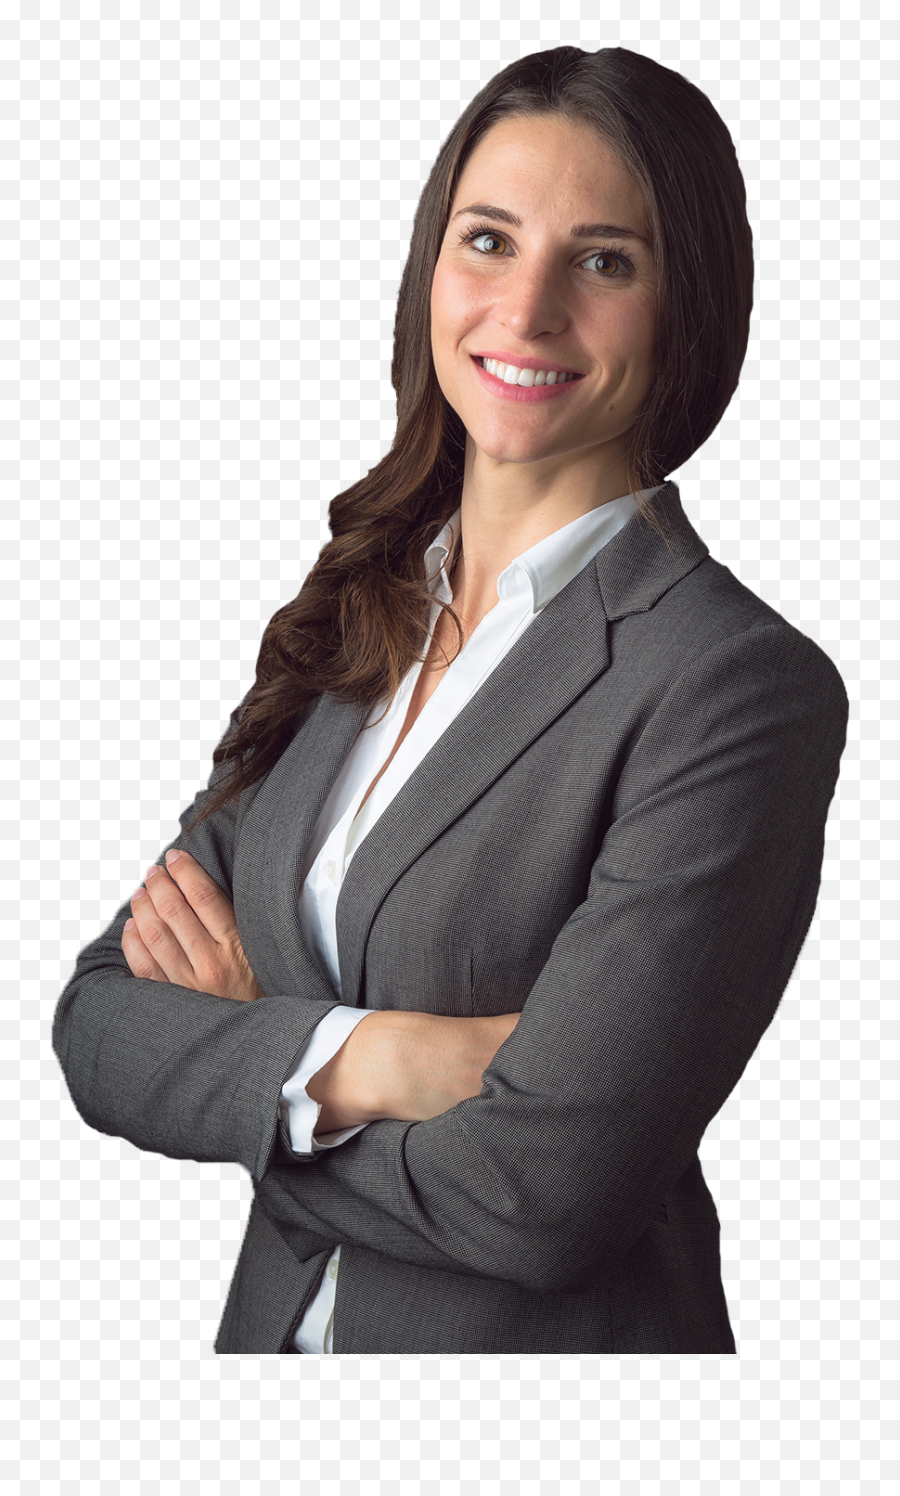 Download Woman Lawyer Image - Gary A Jessica Anvar Esq Hd Businessperson Png,Lawyer Png